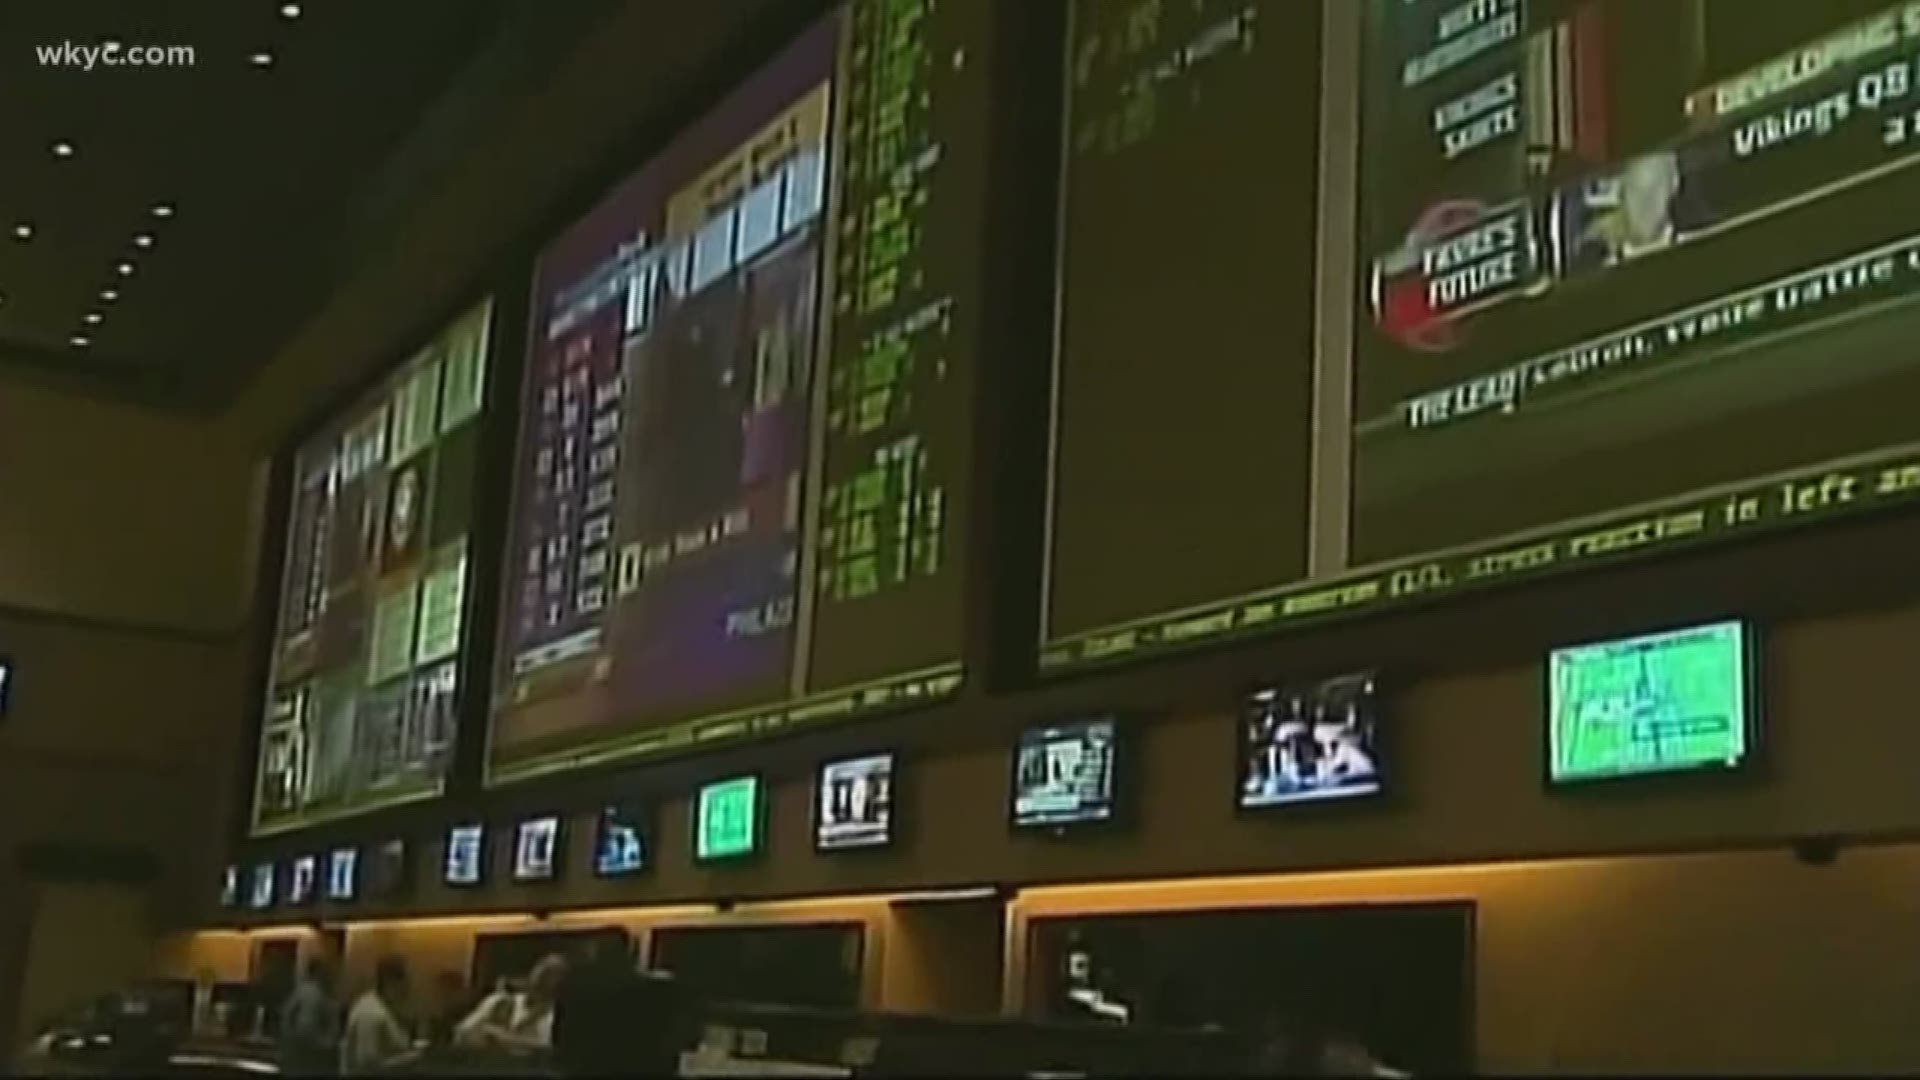 Sports wagering bill introduced in Ohio Senate 